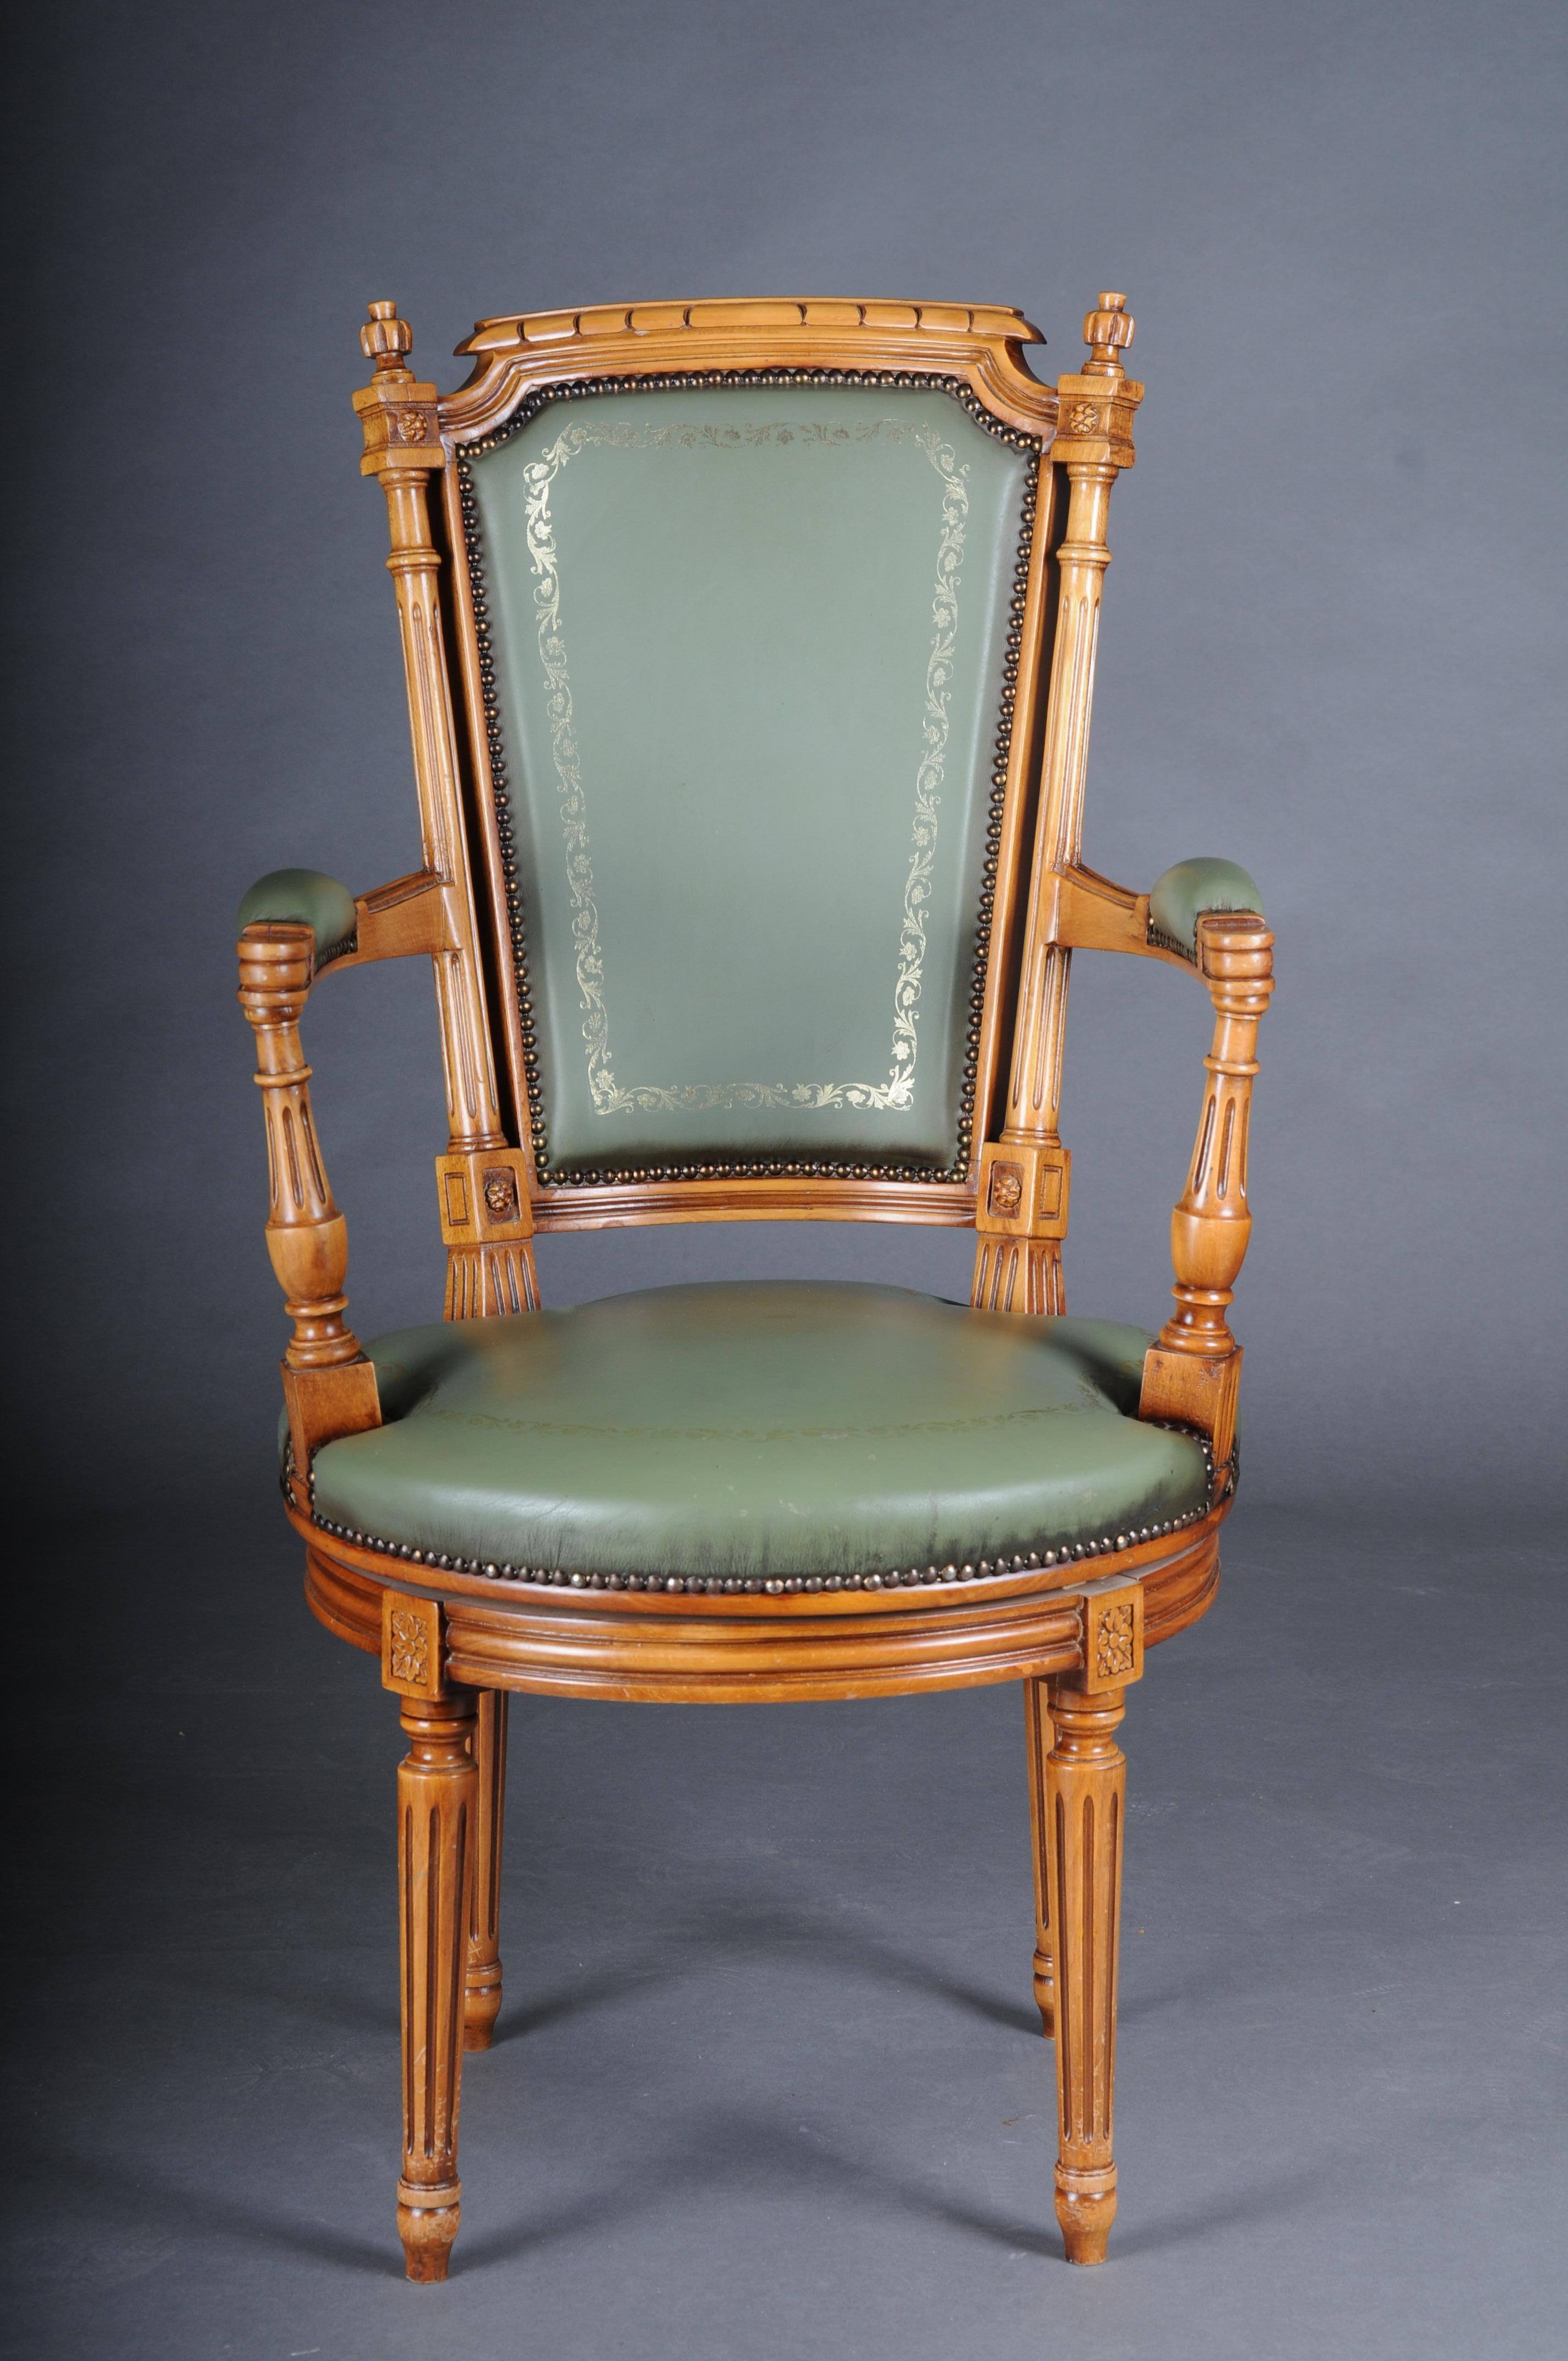 20th Century chair English armchair Leather, yew wood


Classic English armchair / leather armchair
Solid wood and. Swivel and swivel seat function.
Seat and back covered with classic English leather.

